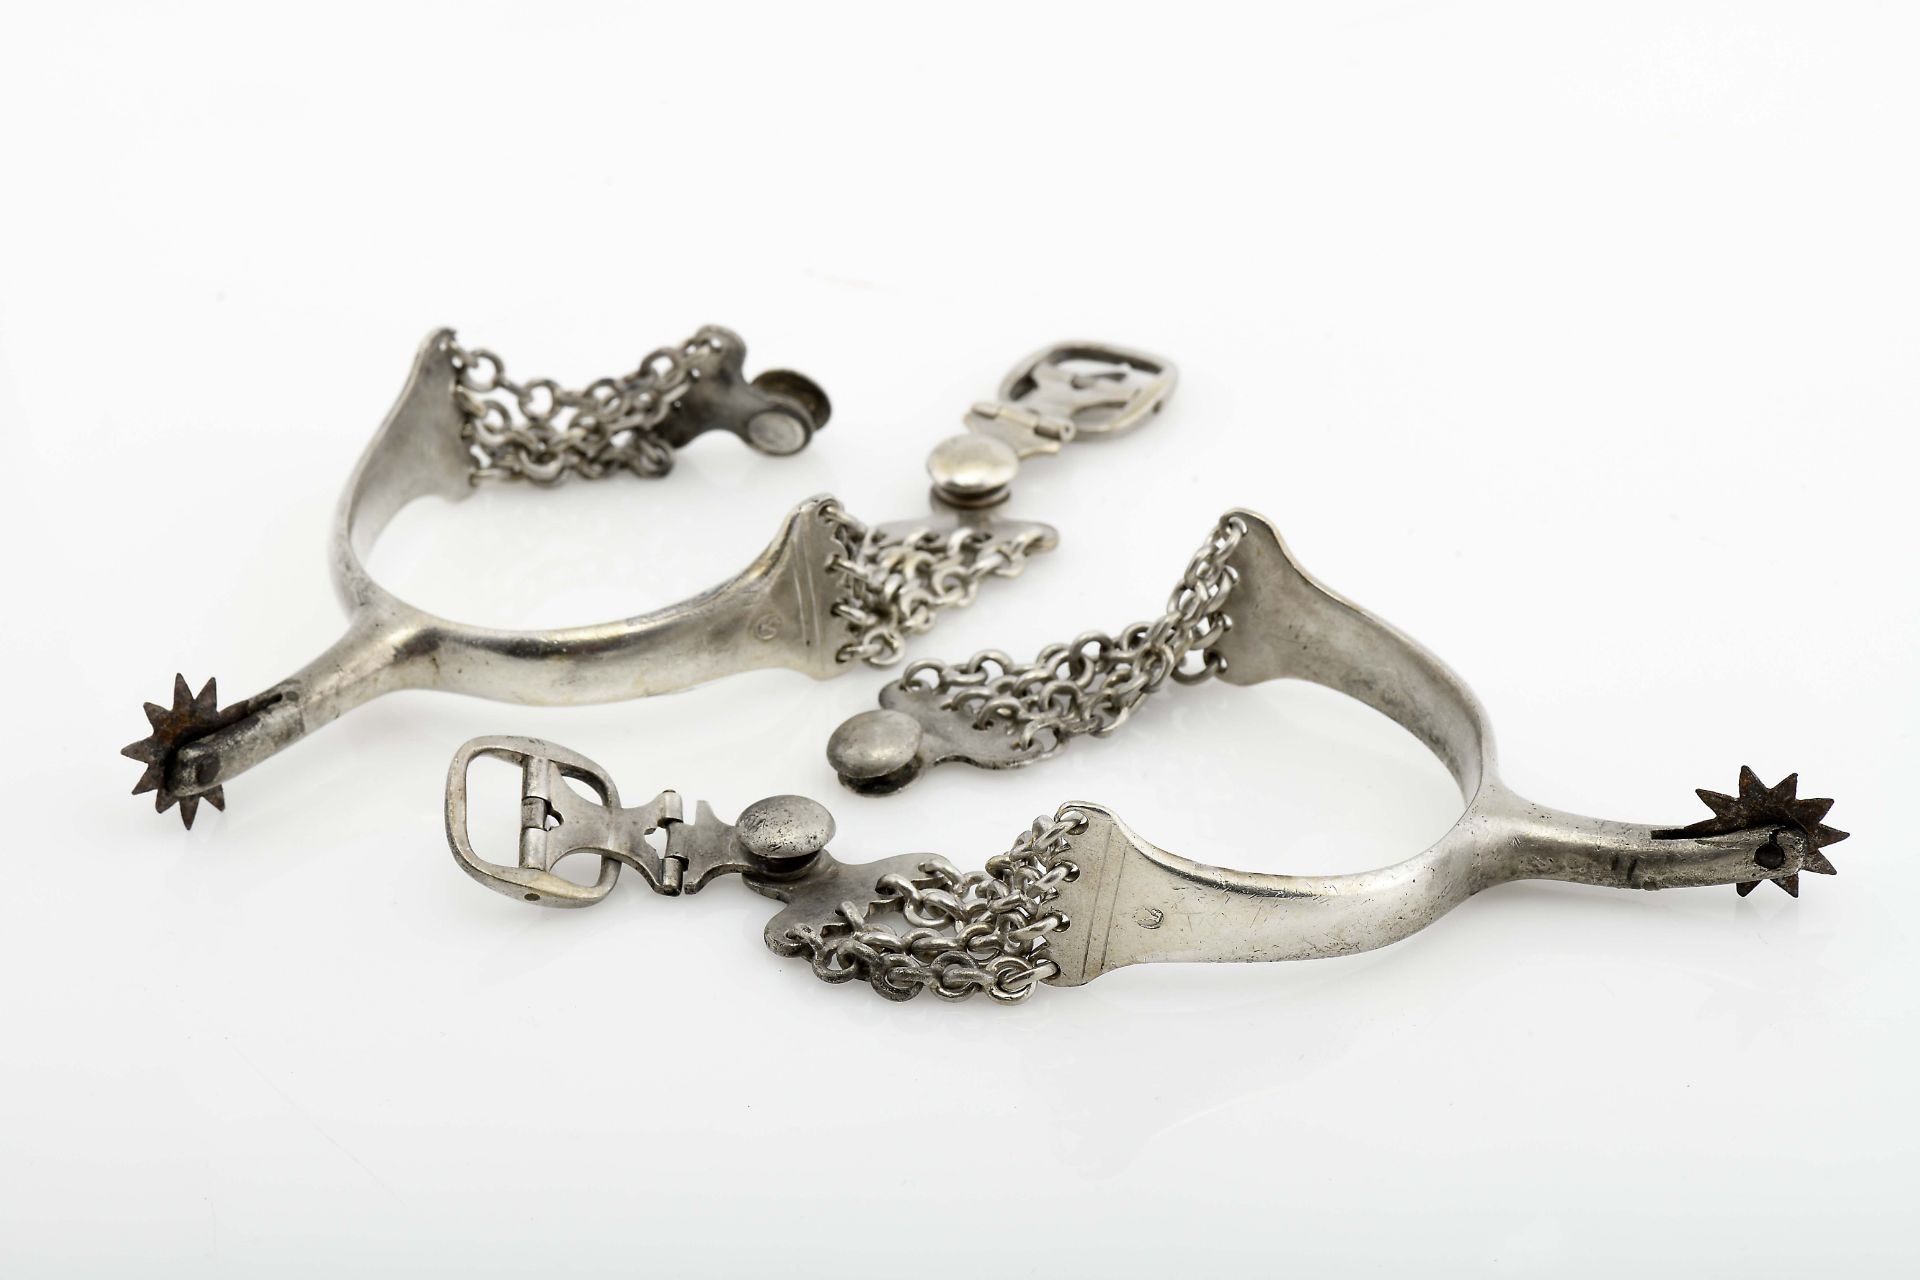 A pair of spurs with chains